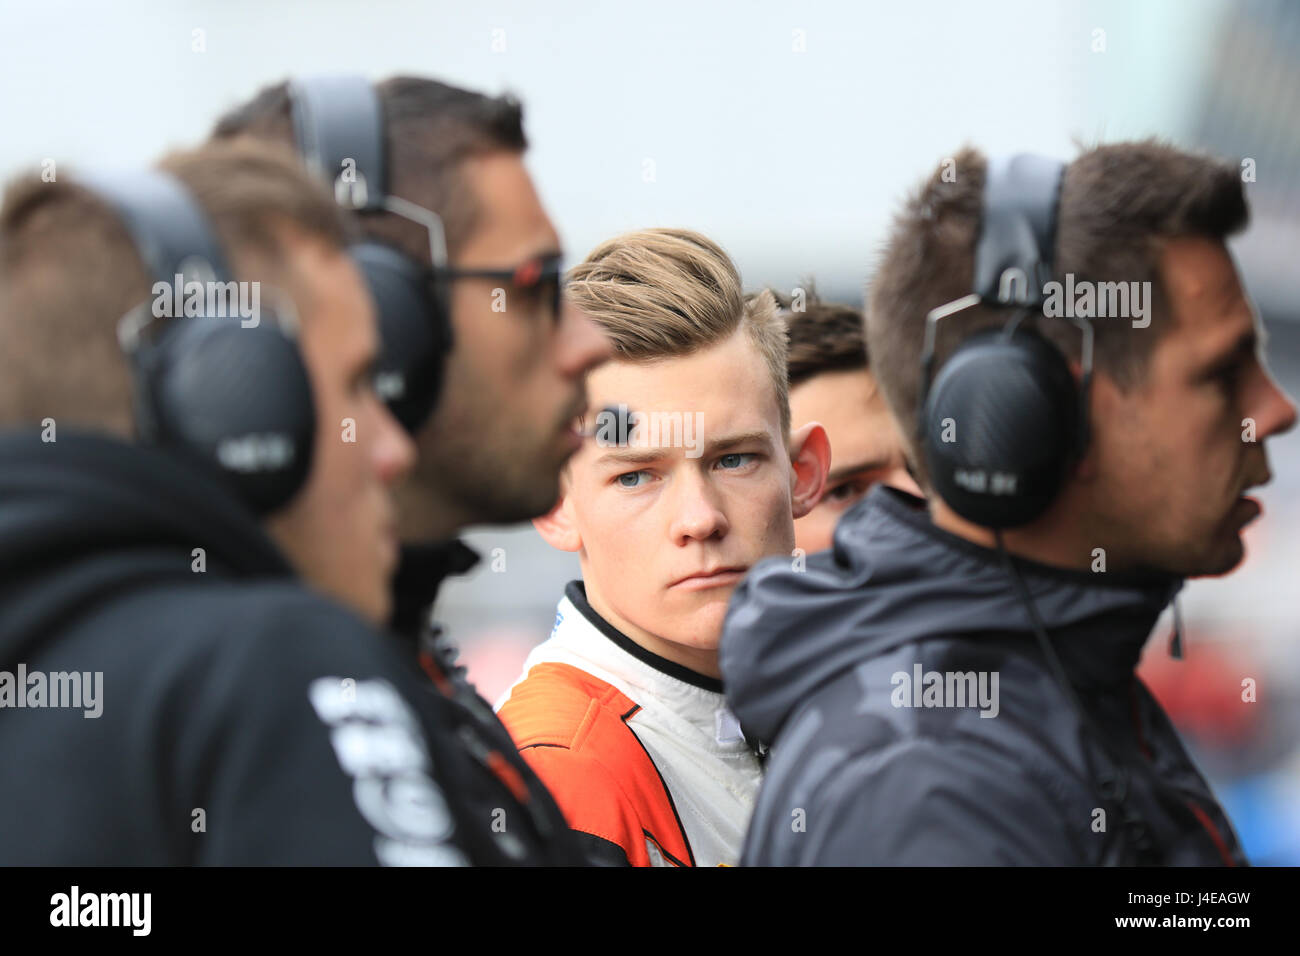 Silverstone, United Kingdom. 13th May, 2017. Thomas Maxwell with his Tech 1 Racing team in the pits at Silverstone for the Formula Renault 2.0 Eurocup Credit: Paren Raval/Alamy Live News Stock Photo